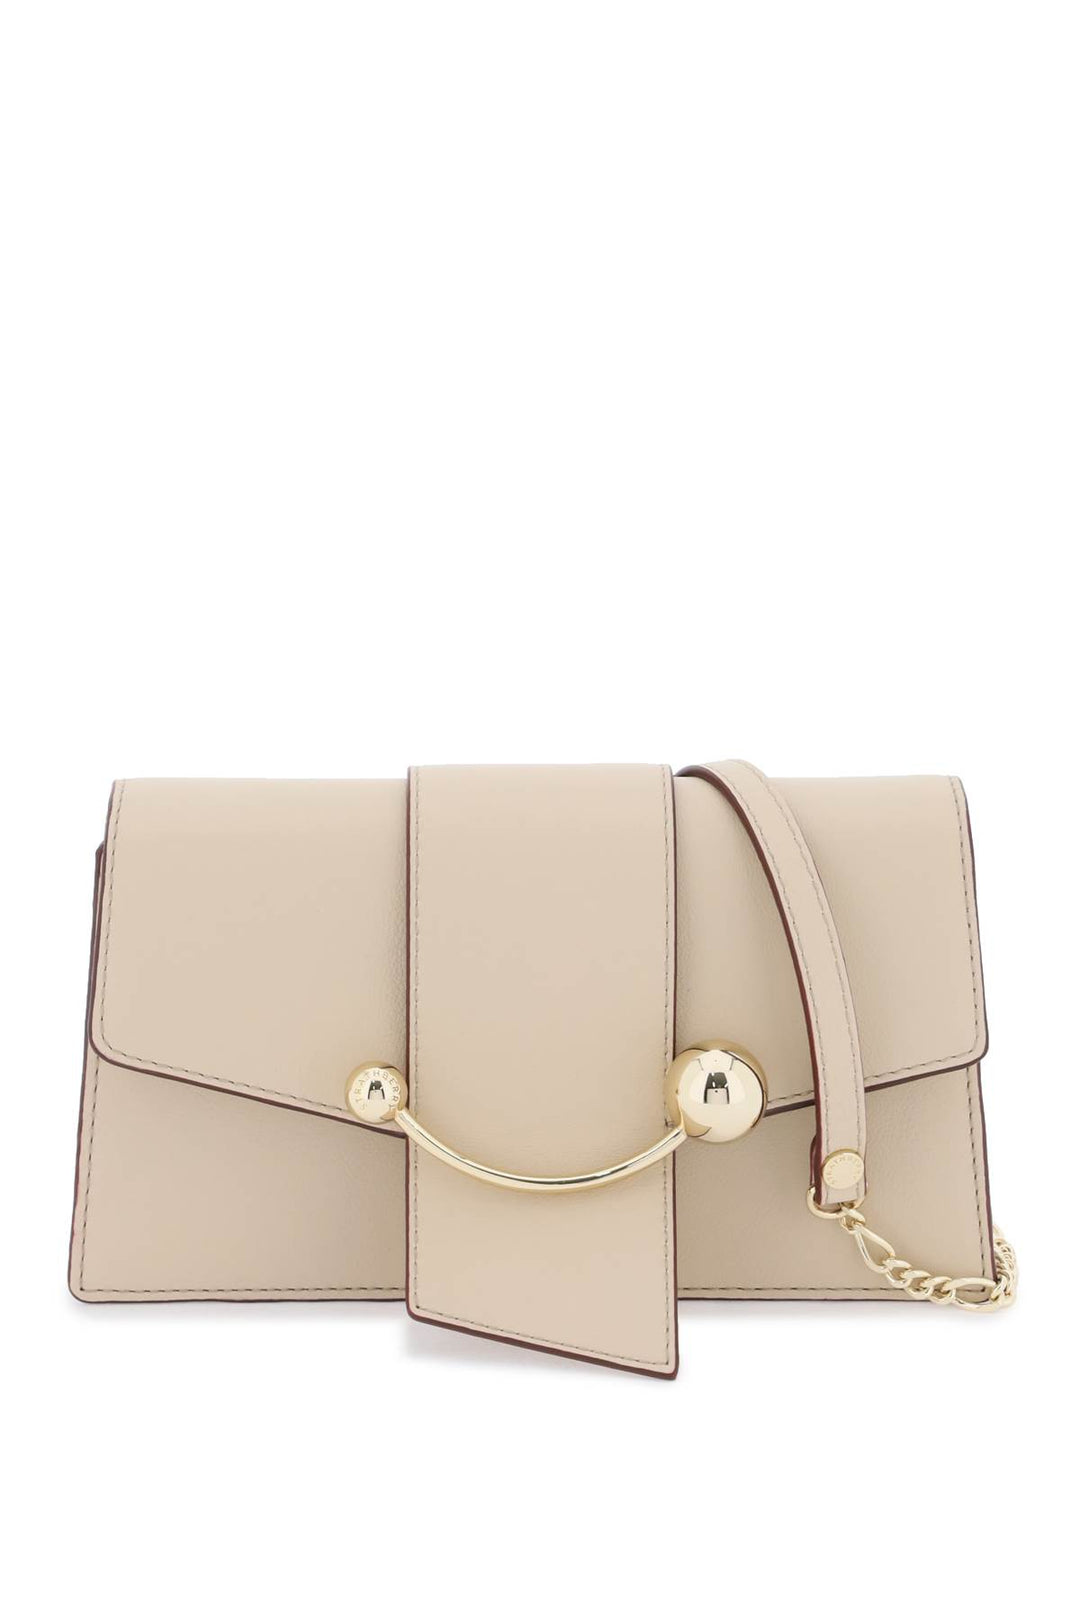 Strathberry Crescent On A Chain Crossbody Mini Bag   Beige